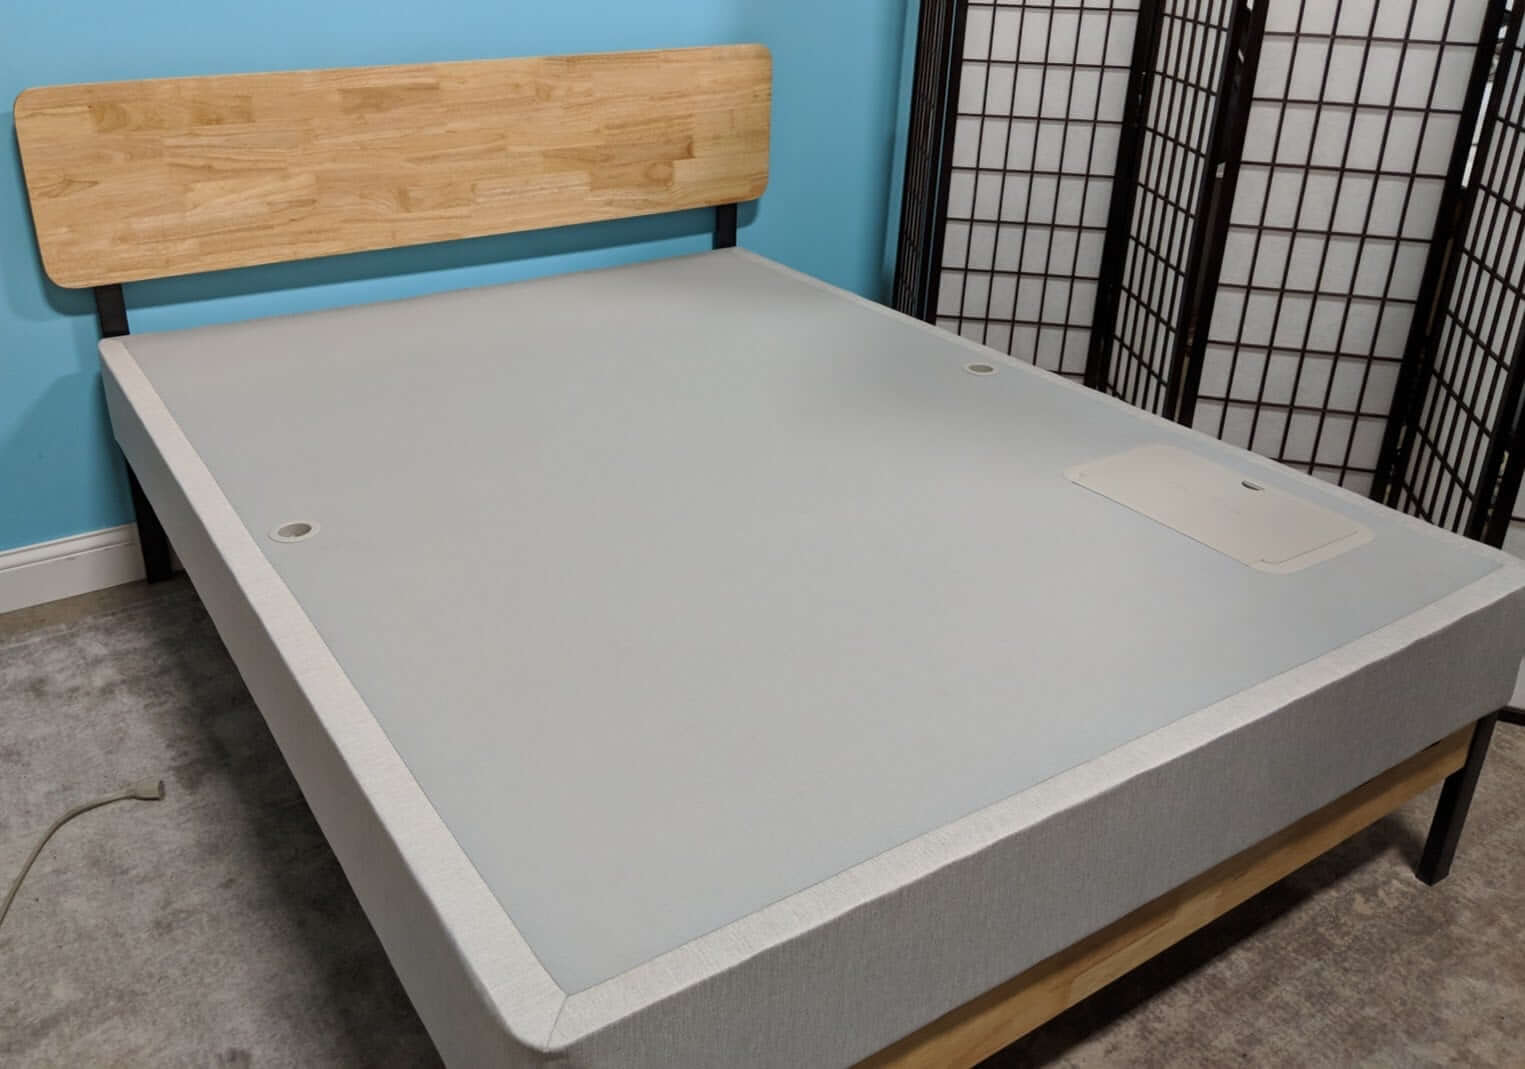 Sleep Number C2 Mattress Review, Sleep Number Bed C2 King Size